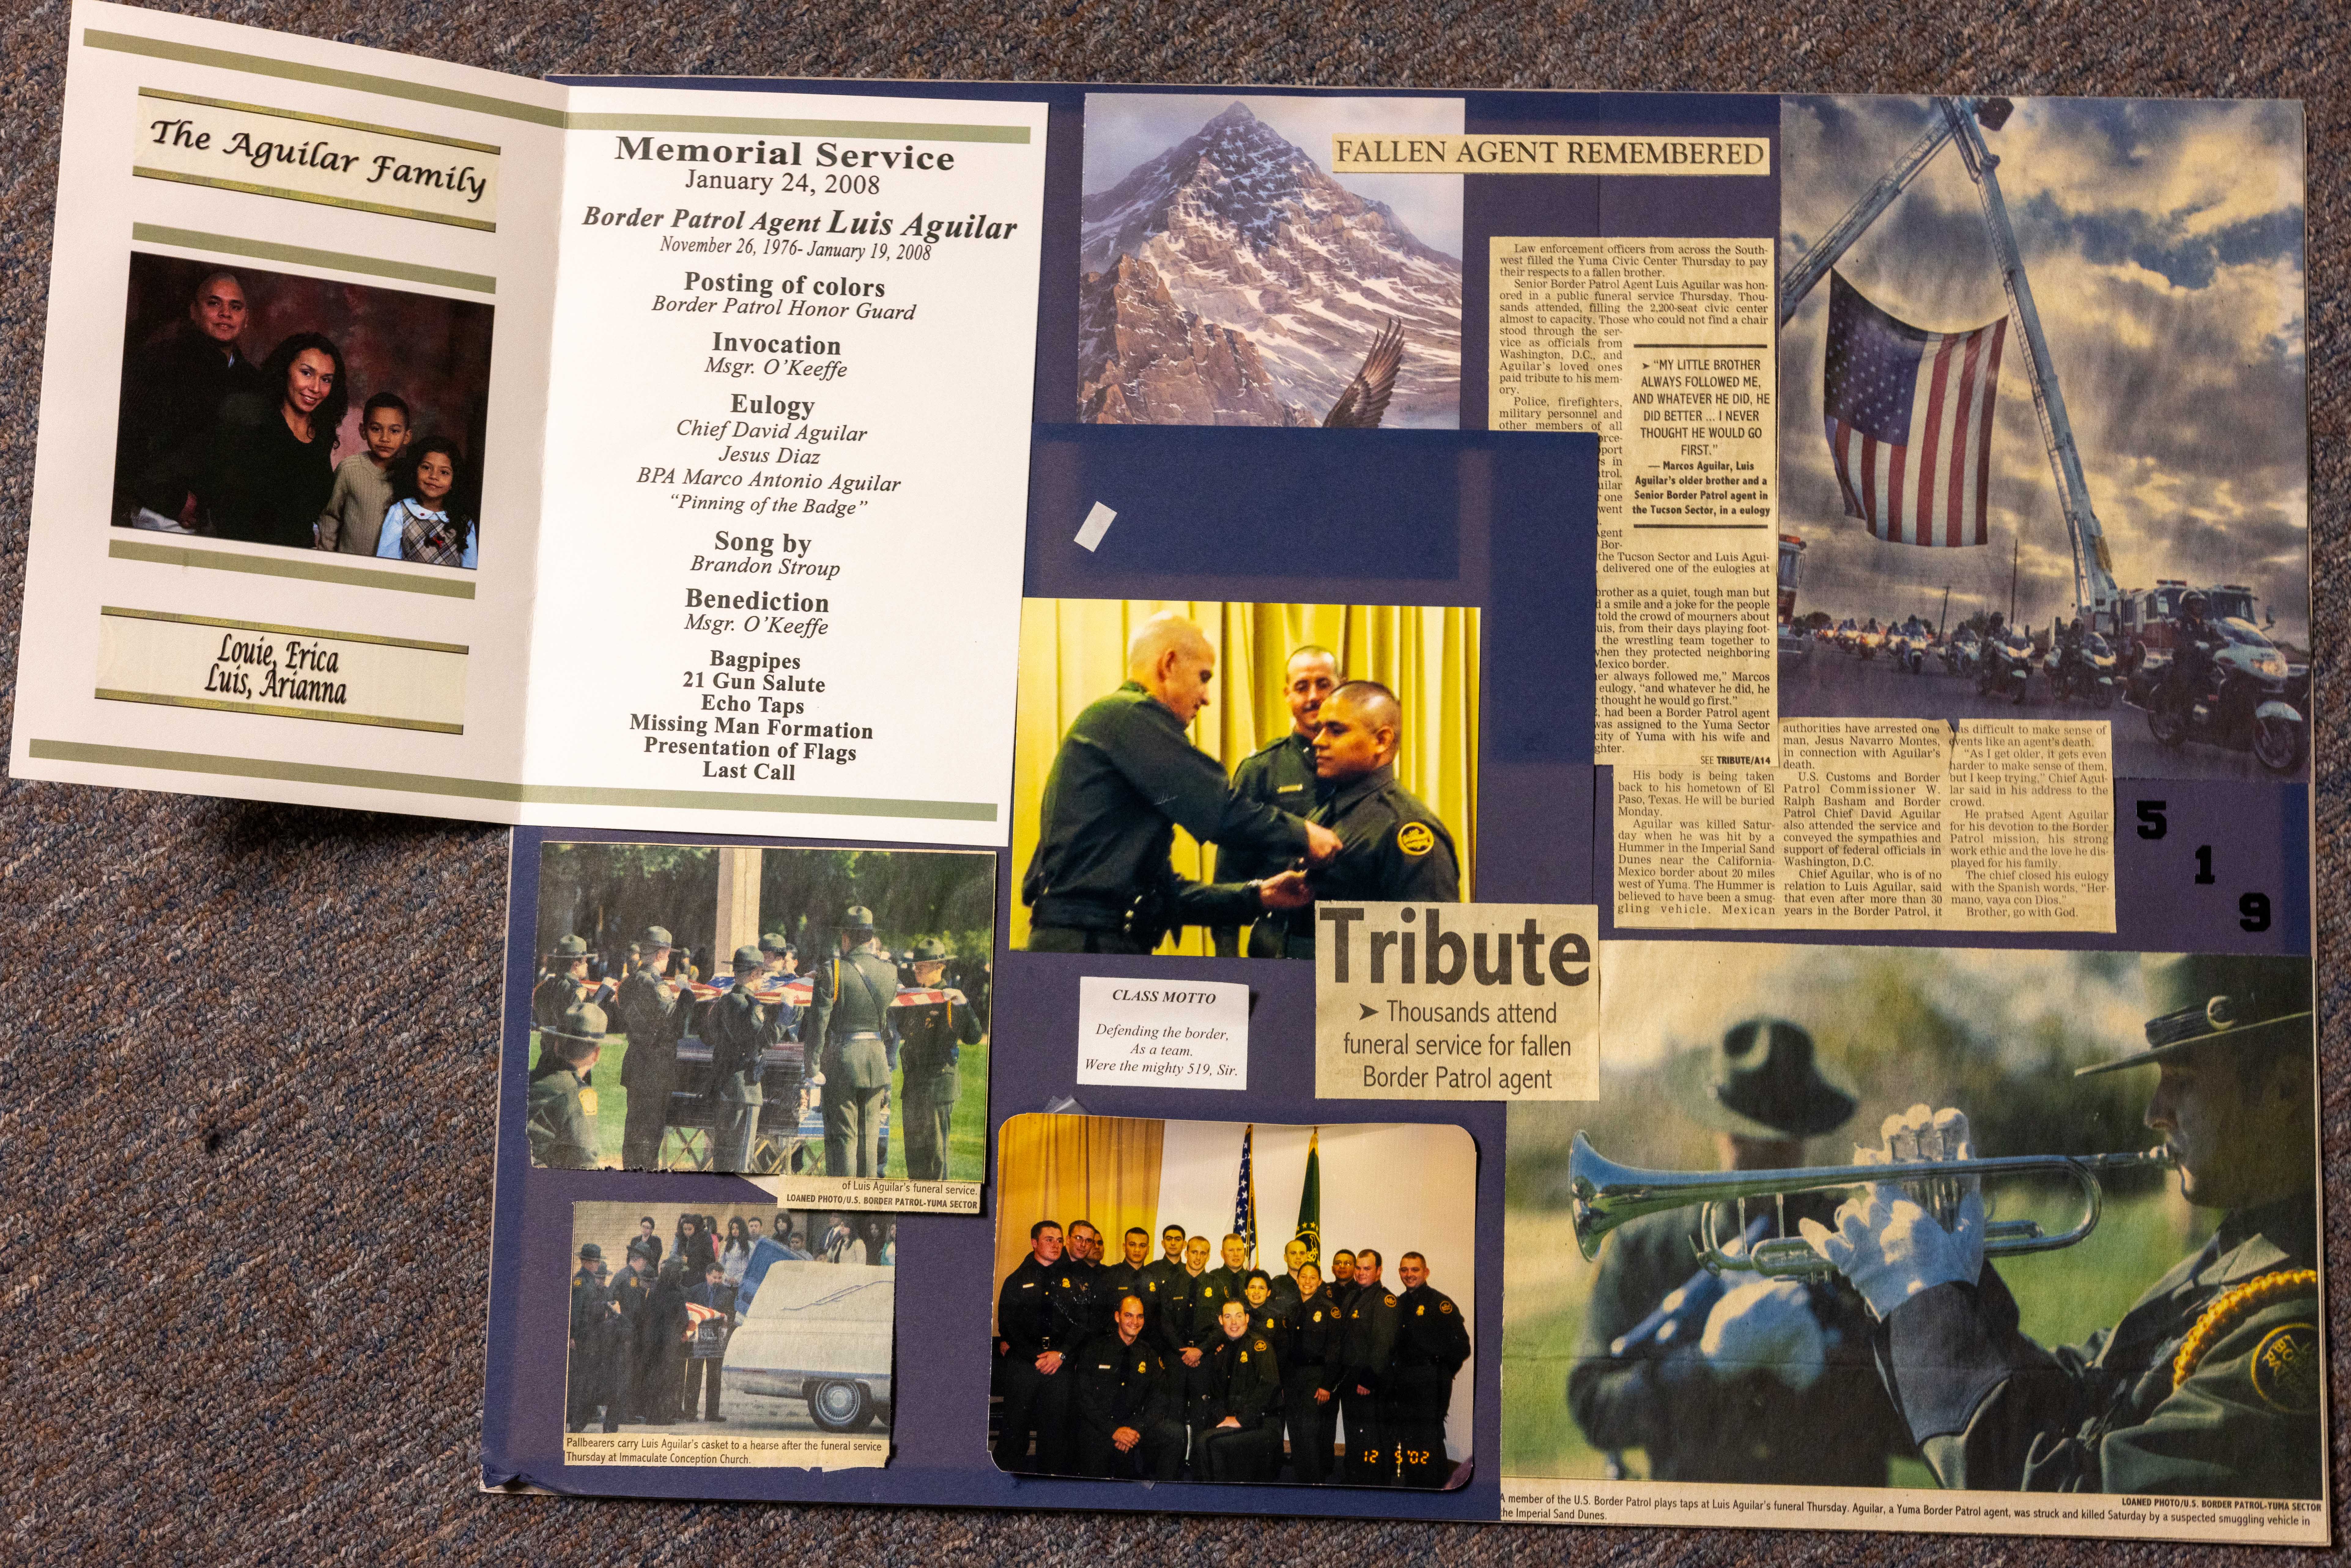 A board with images, a memorial service program and newspaper clippings highlight Border Patrol Agent Luis Aguilar.